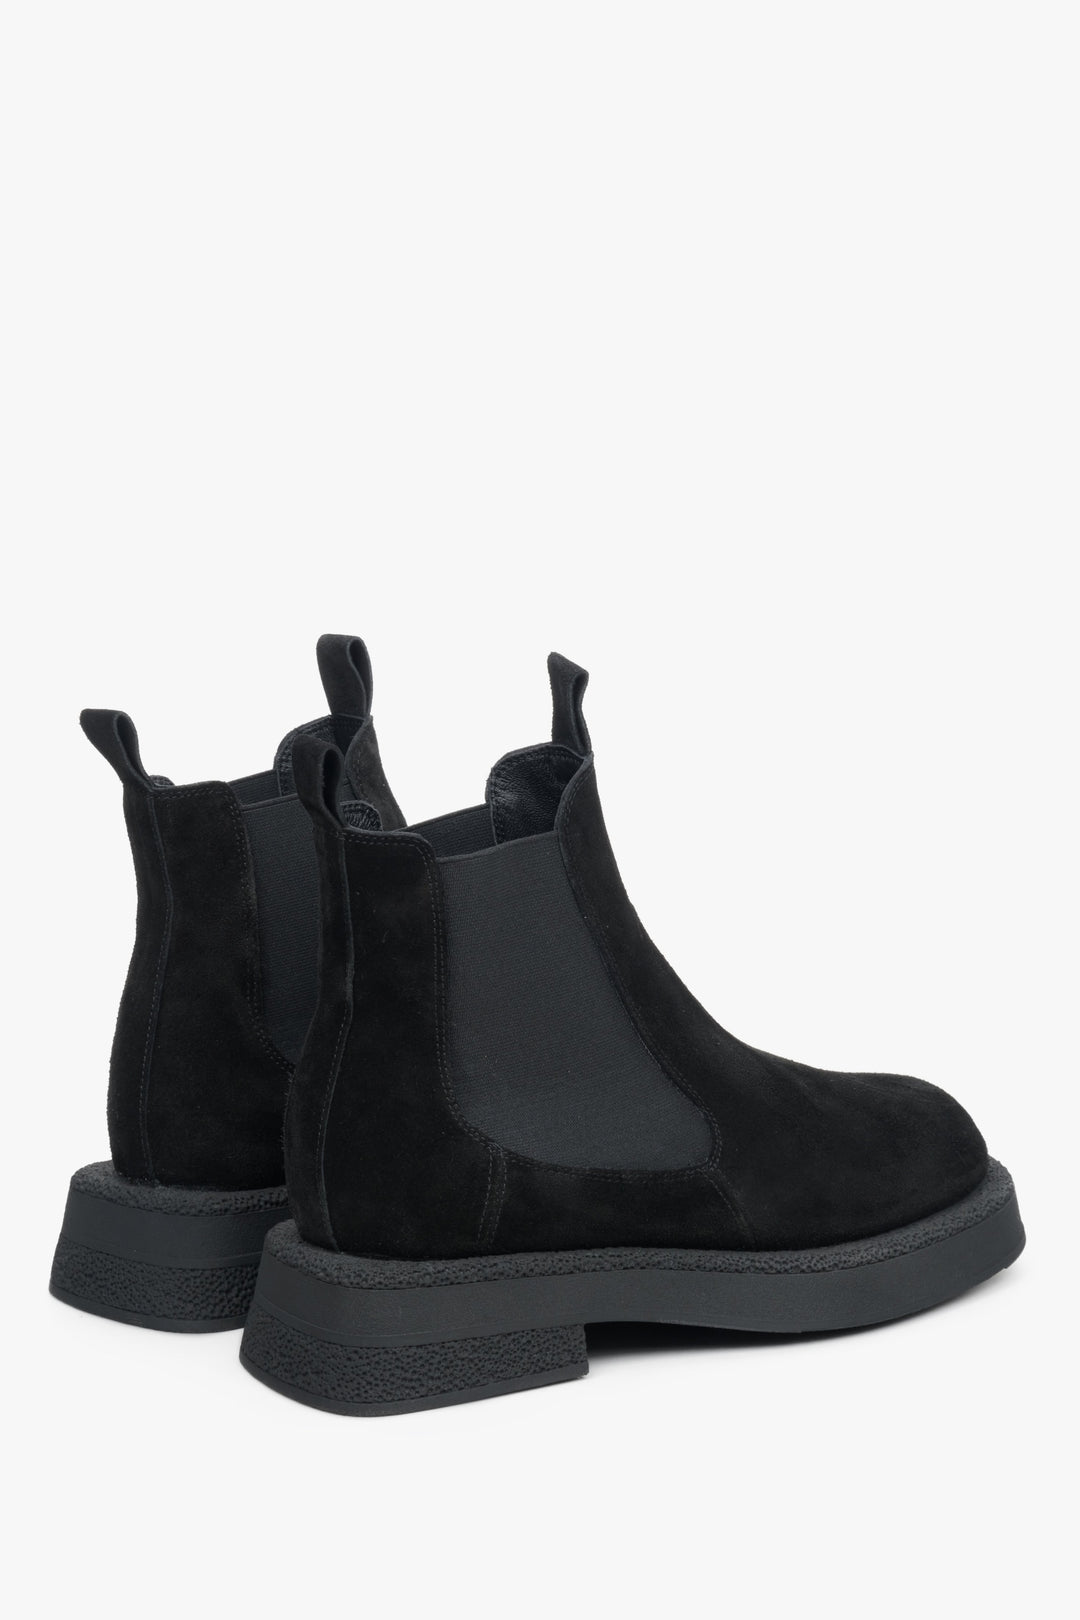 Women's genuine suede Chelsea boots in black Estro - a close-up on heel counter.